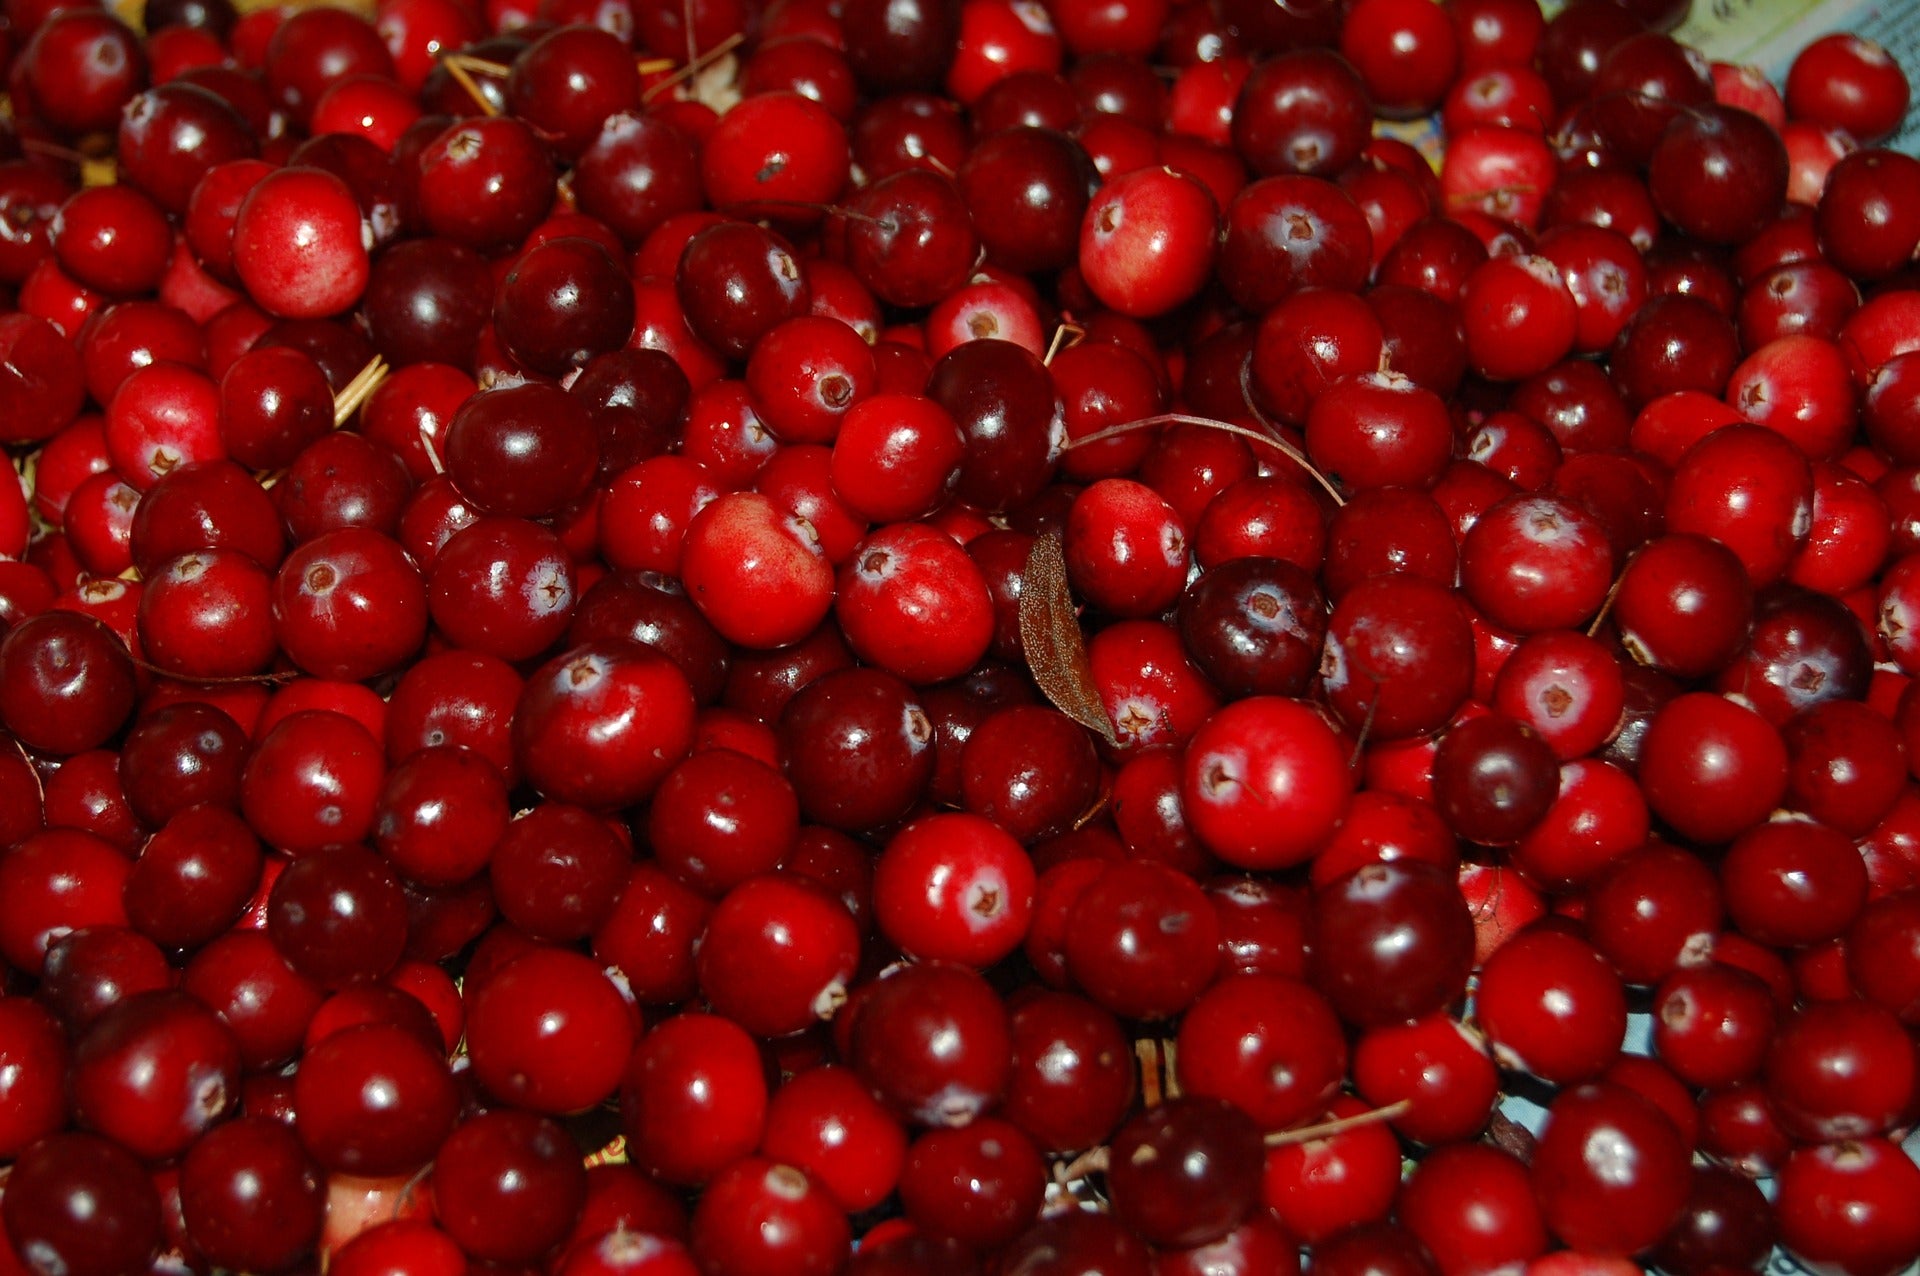 Cranberry Facts, History of the Cranberry